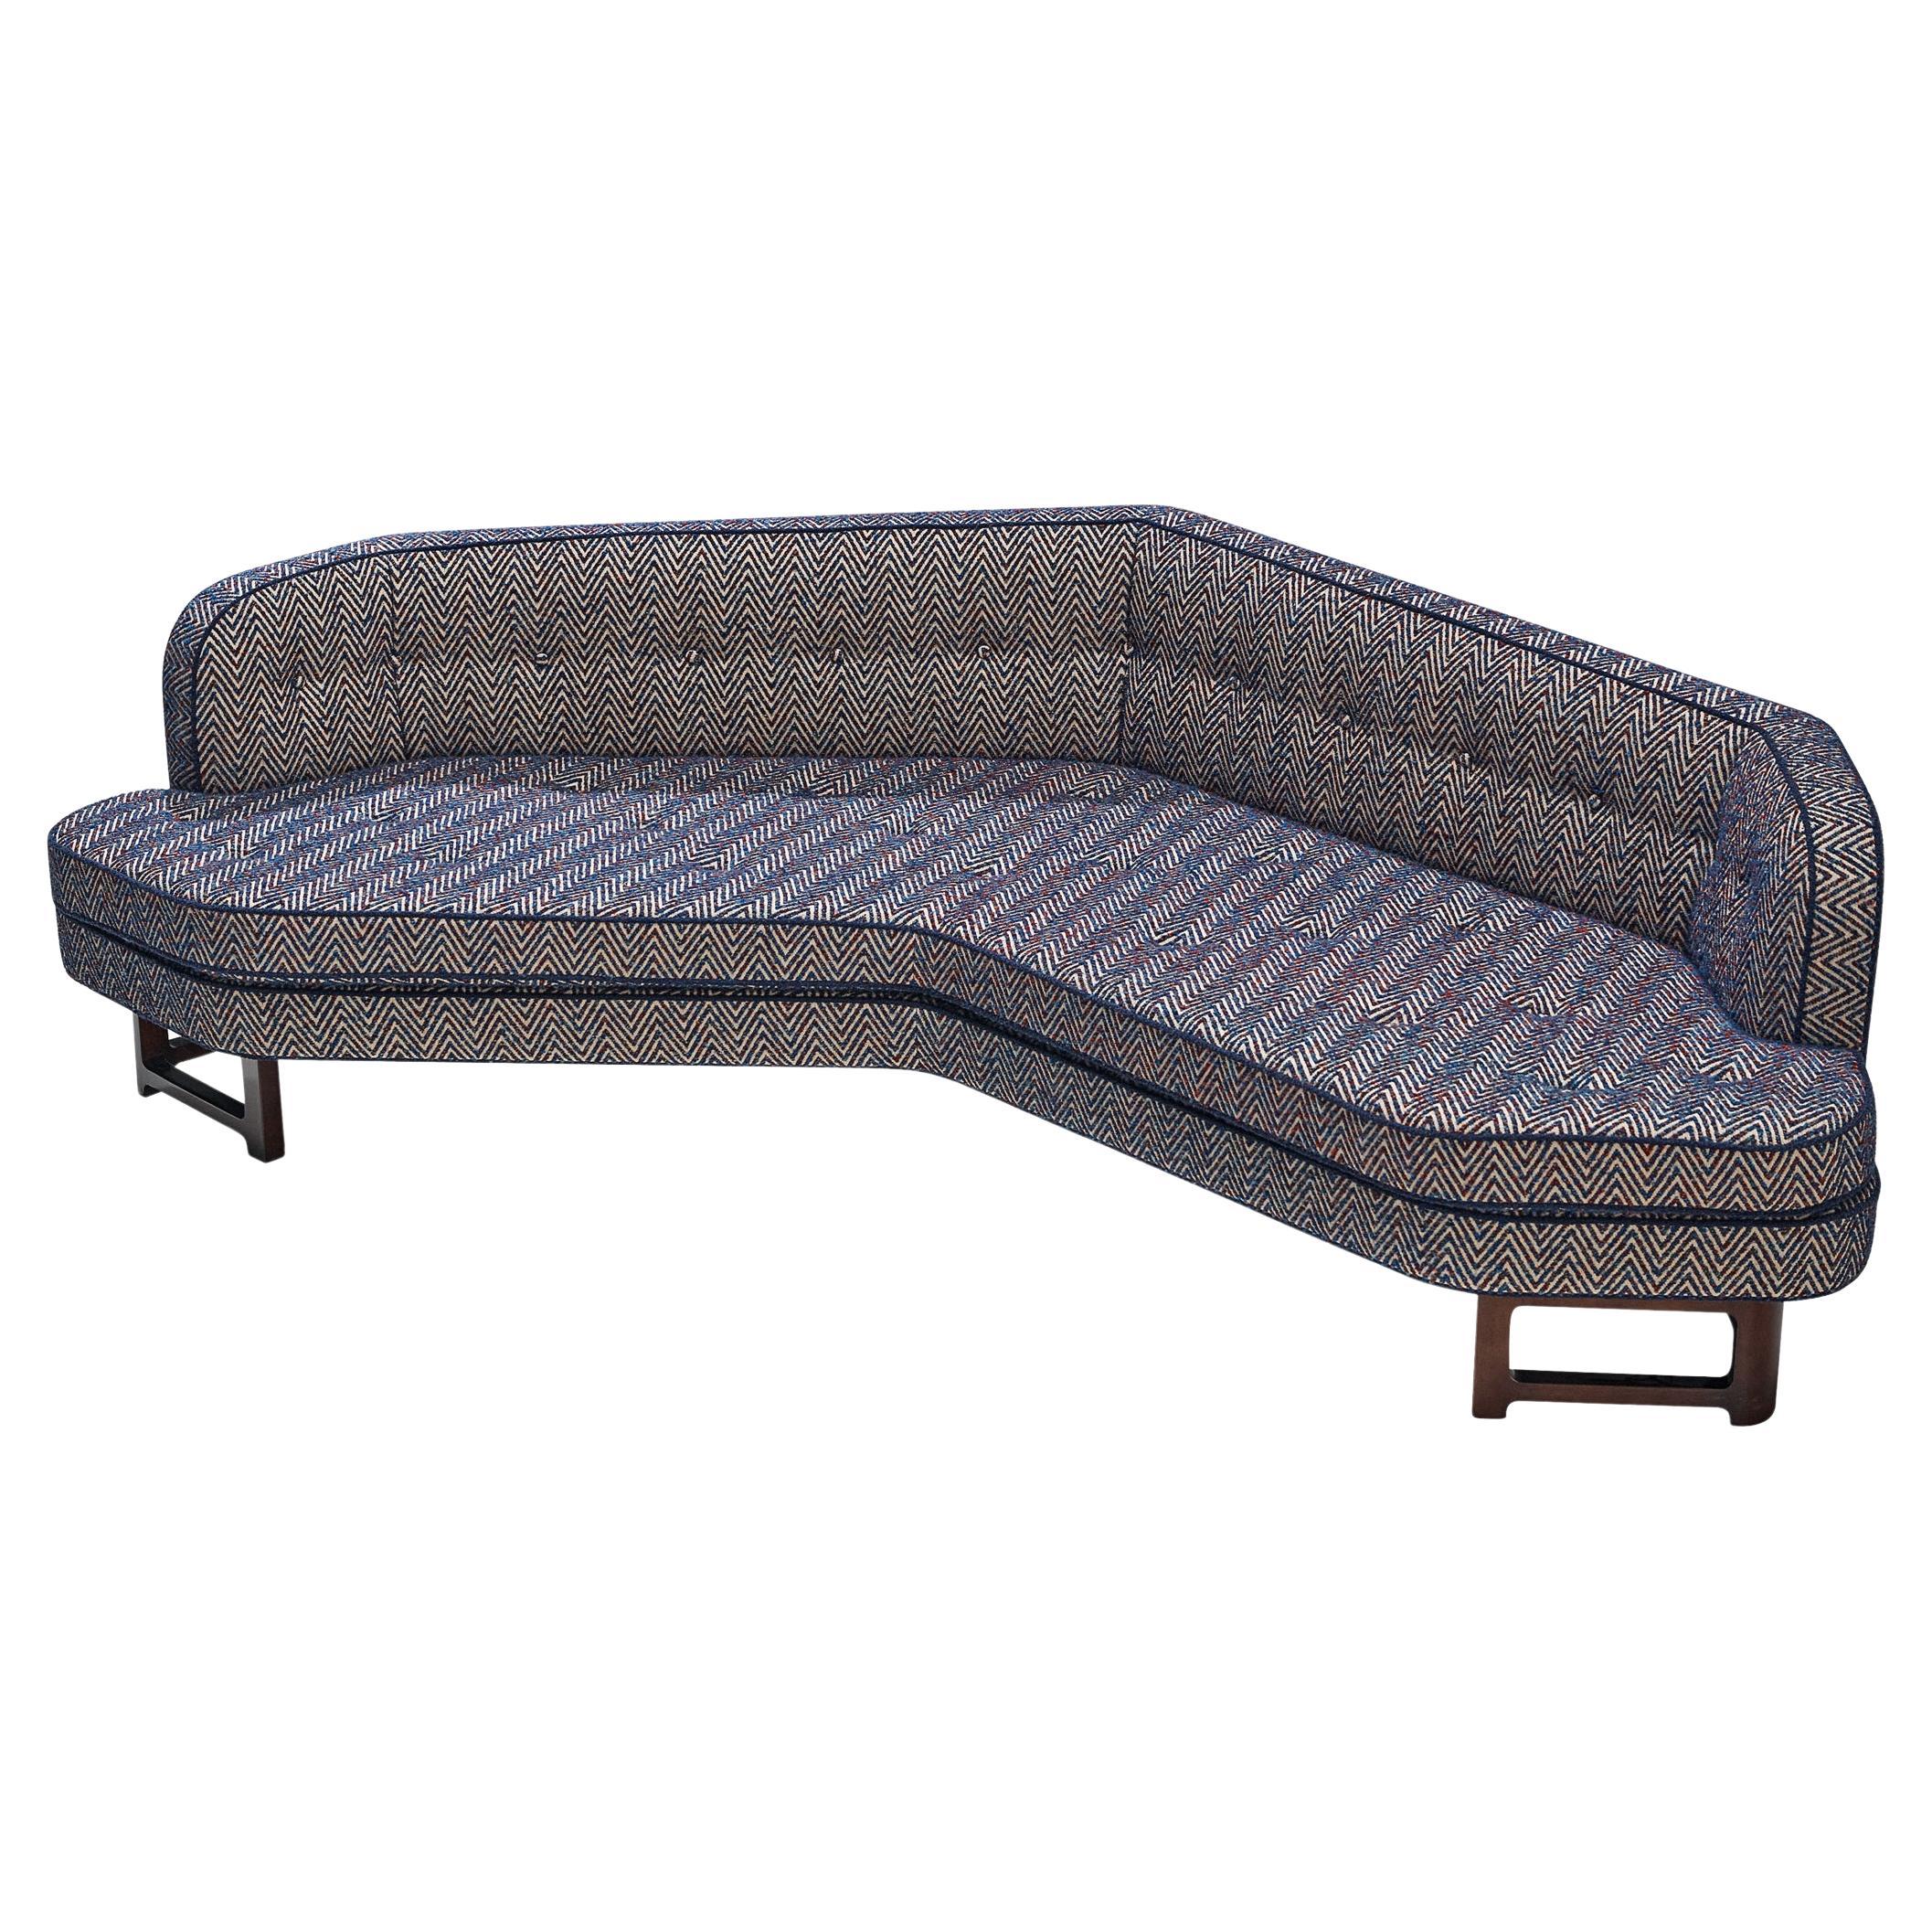 Edward Wormley for Dunbar 'Janus' Sofa in Multicolored Patterned Upholstery 